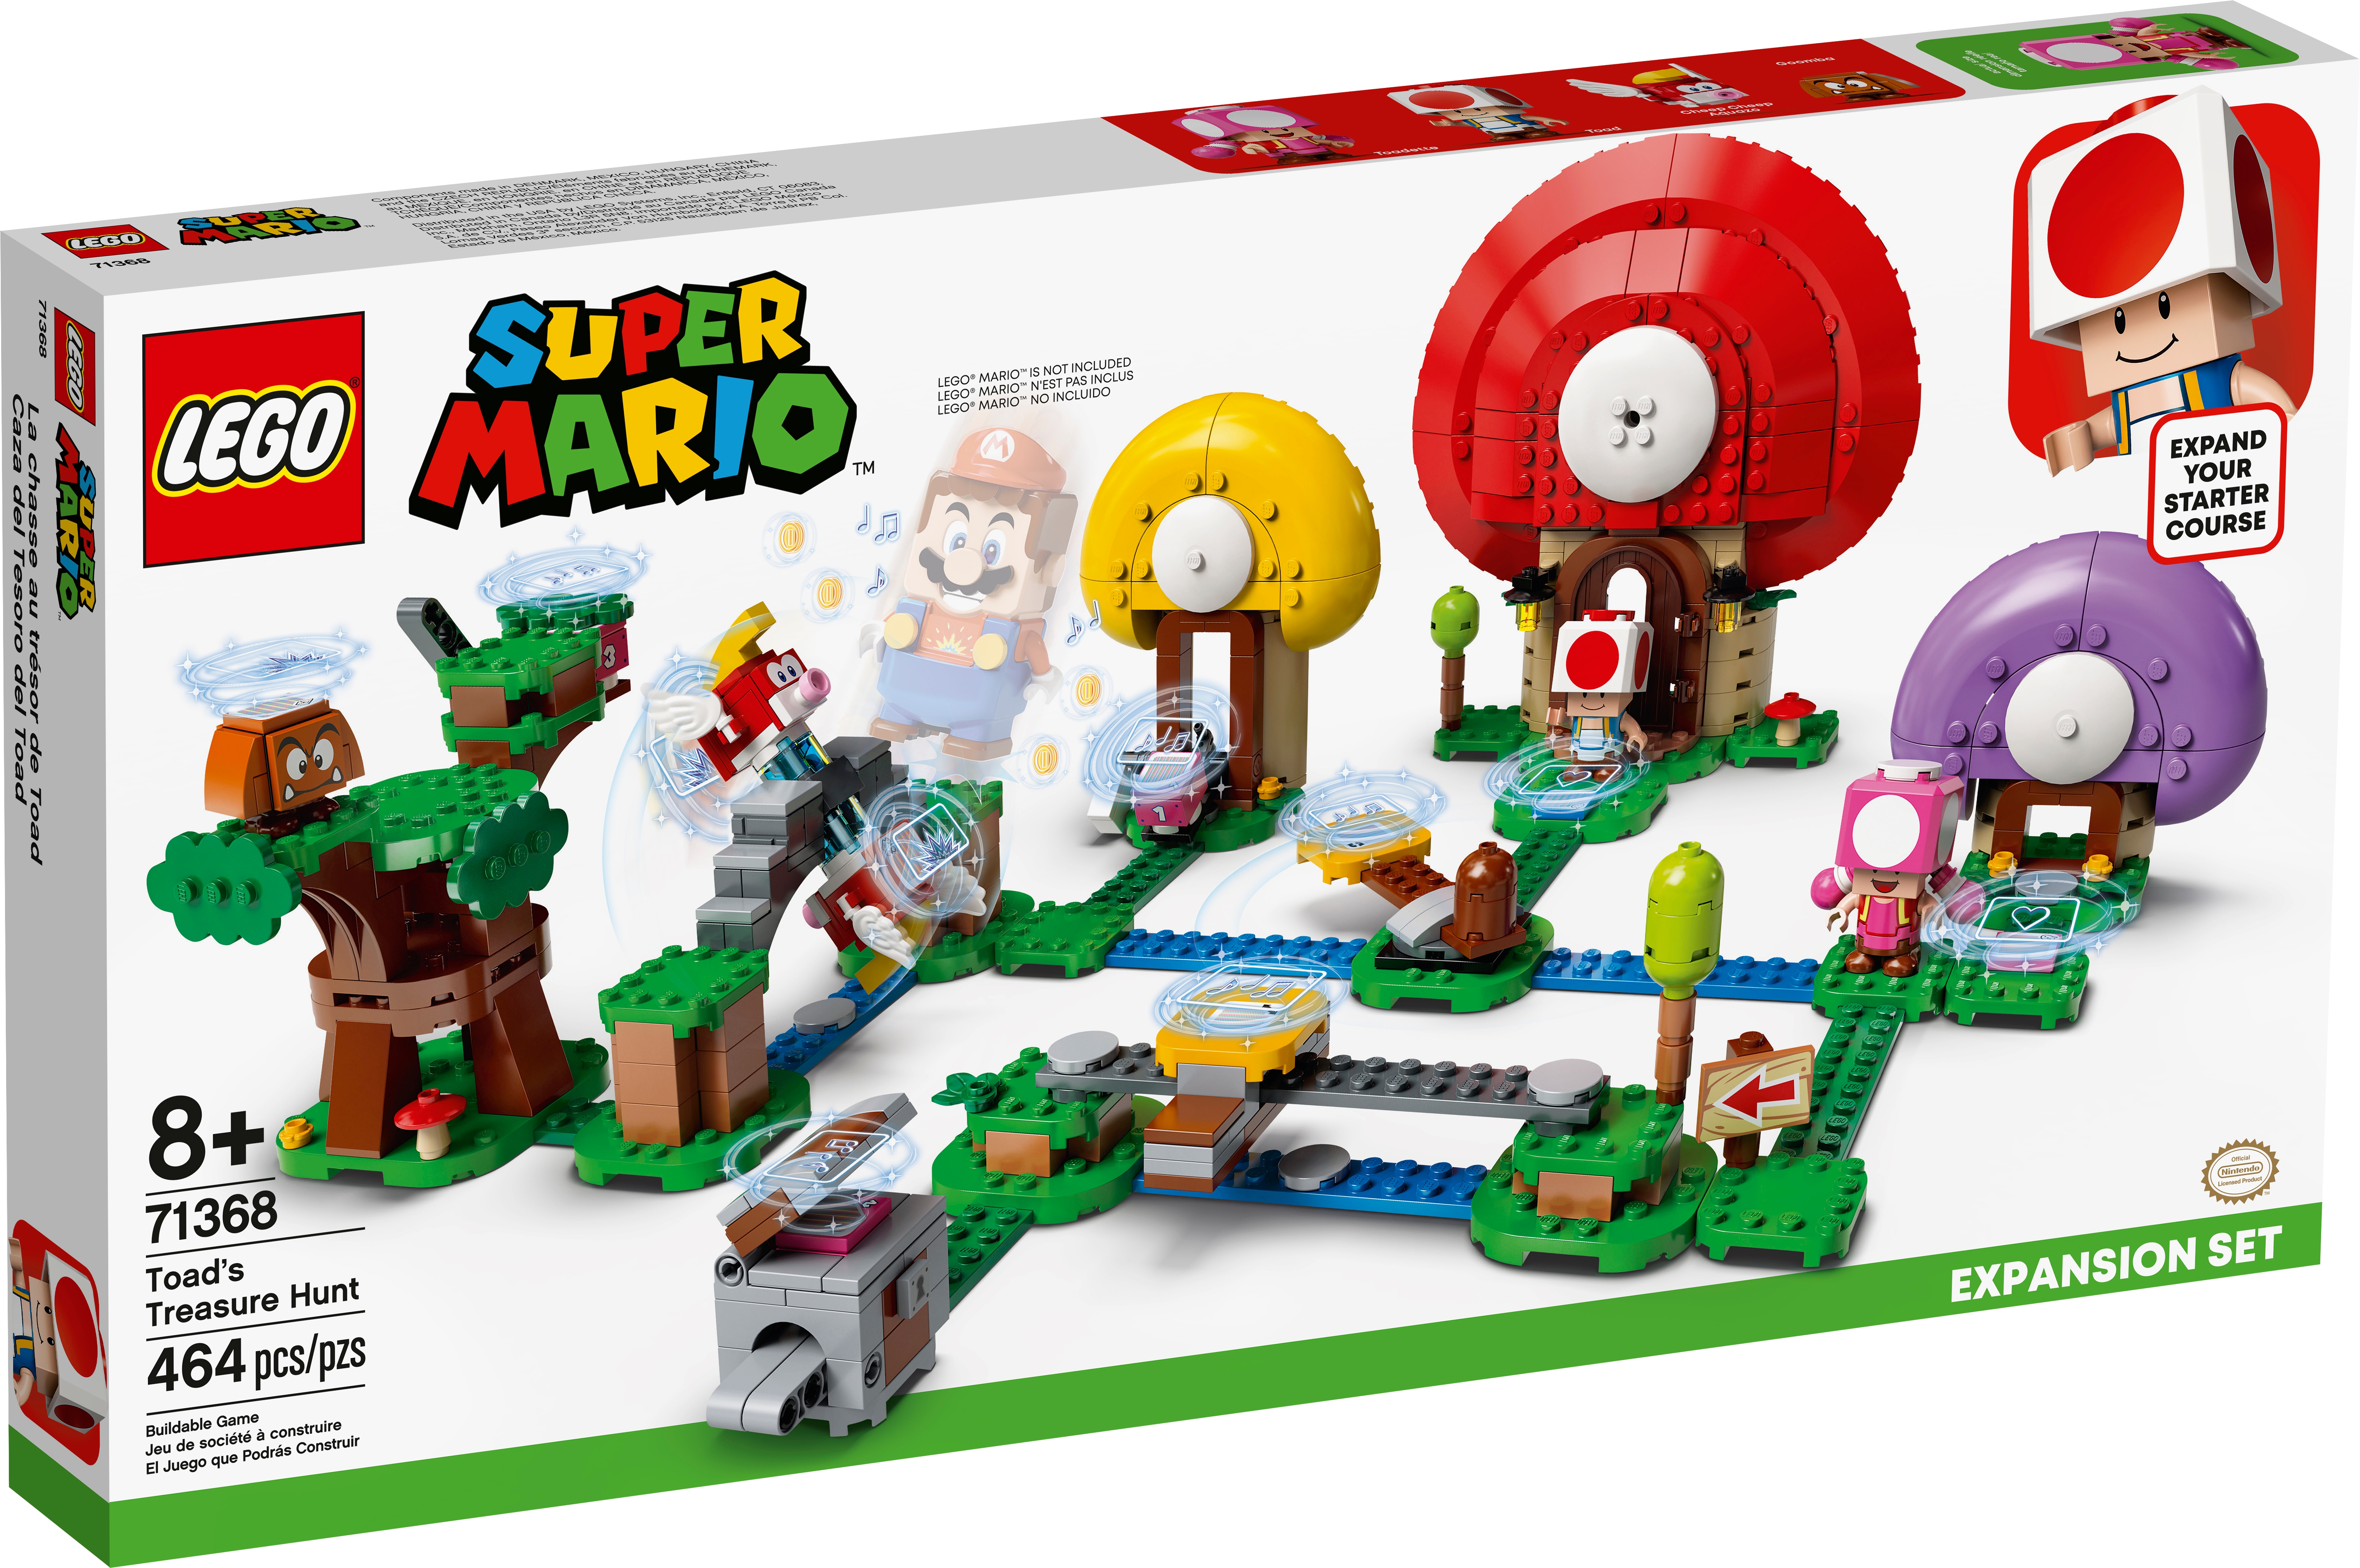 Toad S Treasure Hunt Expansion Set 71368 Lego Super Mario Buy Online At The Official Lego Shop Us